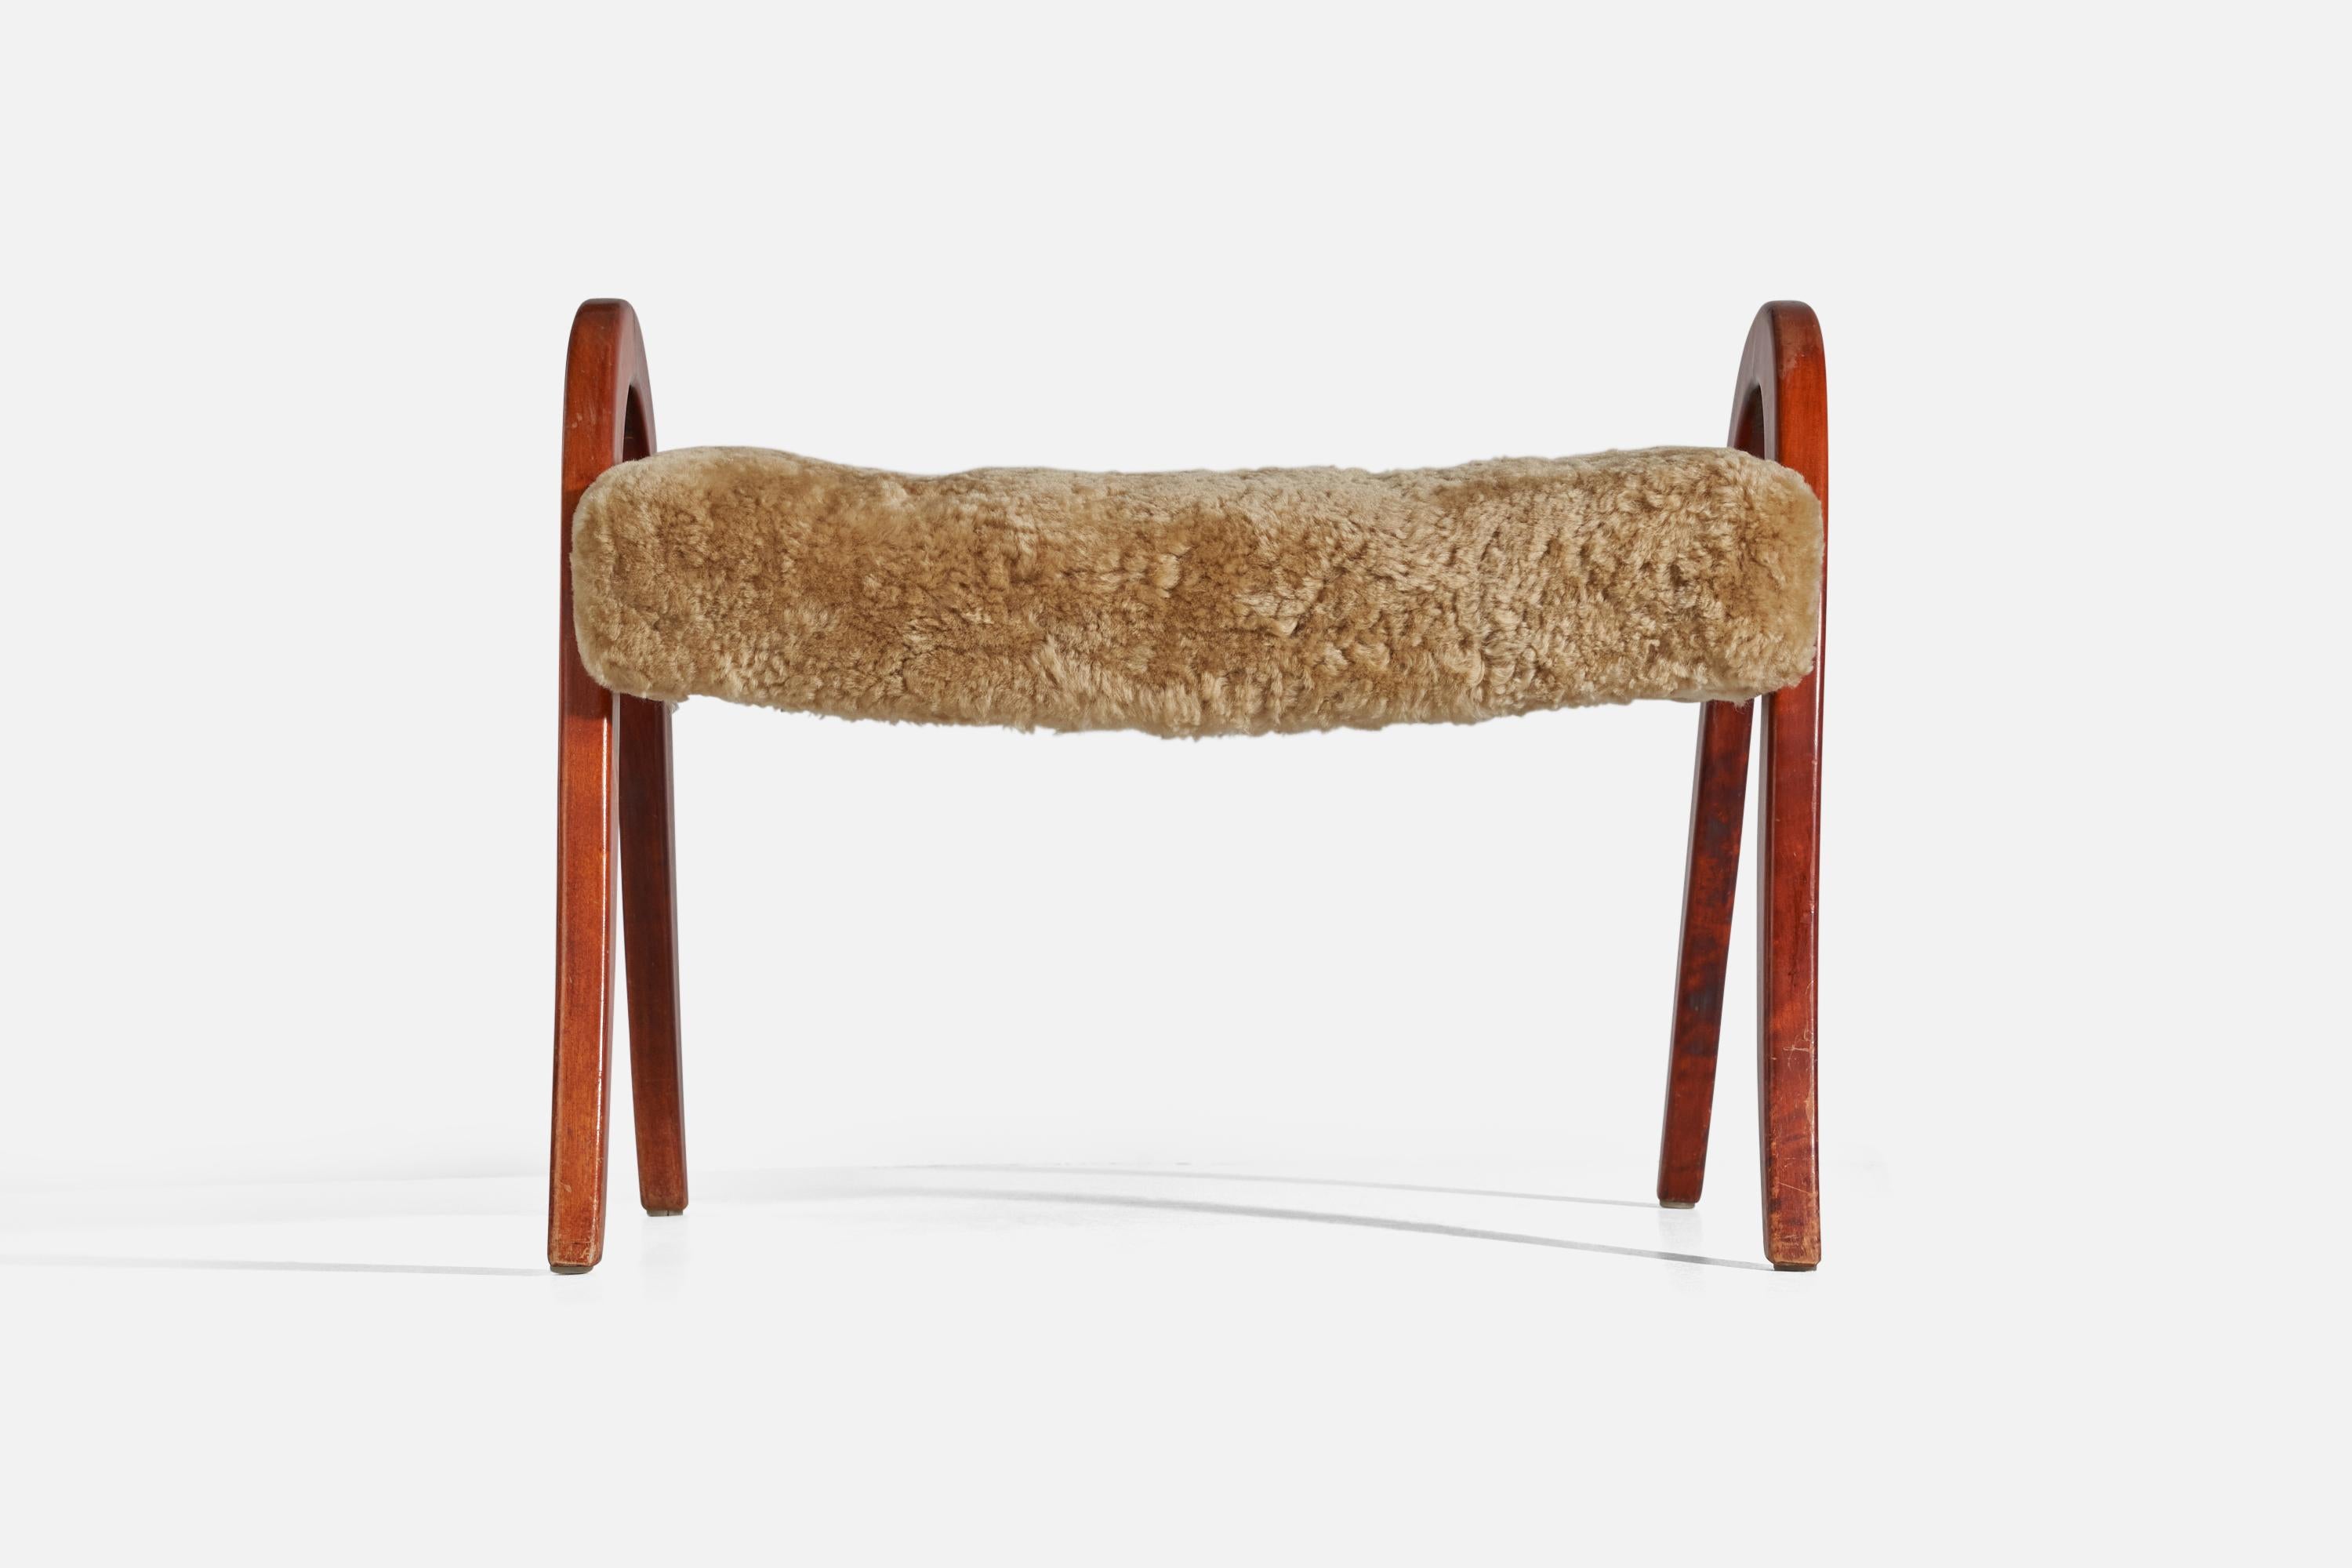 Swedish Designer, Stool, Stained Wood, Sheepskin, Sweden, 1940s In Good Condition For Sale In High Point, NC